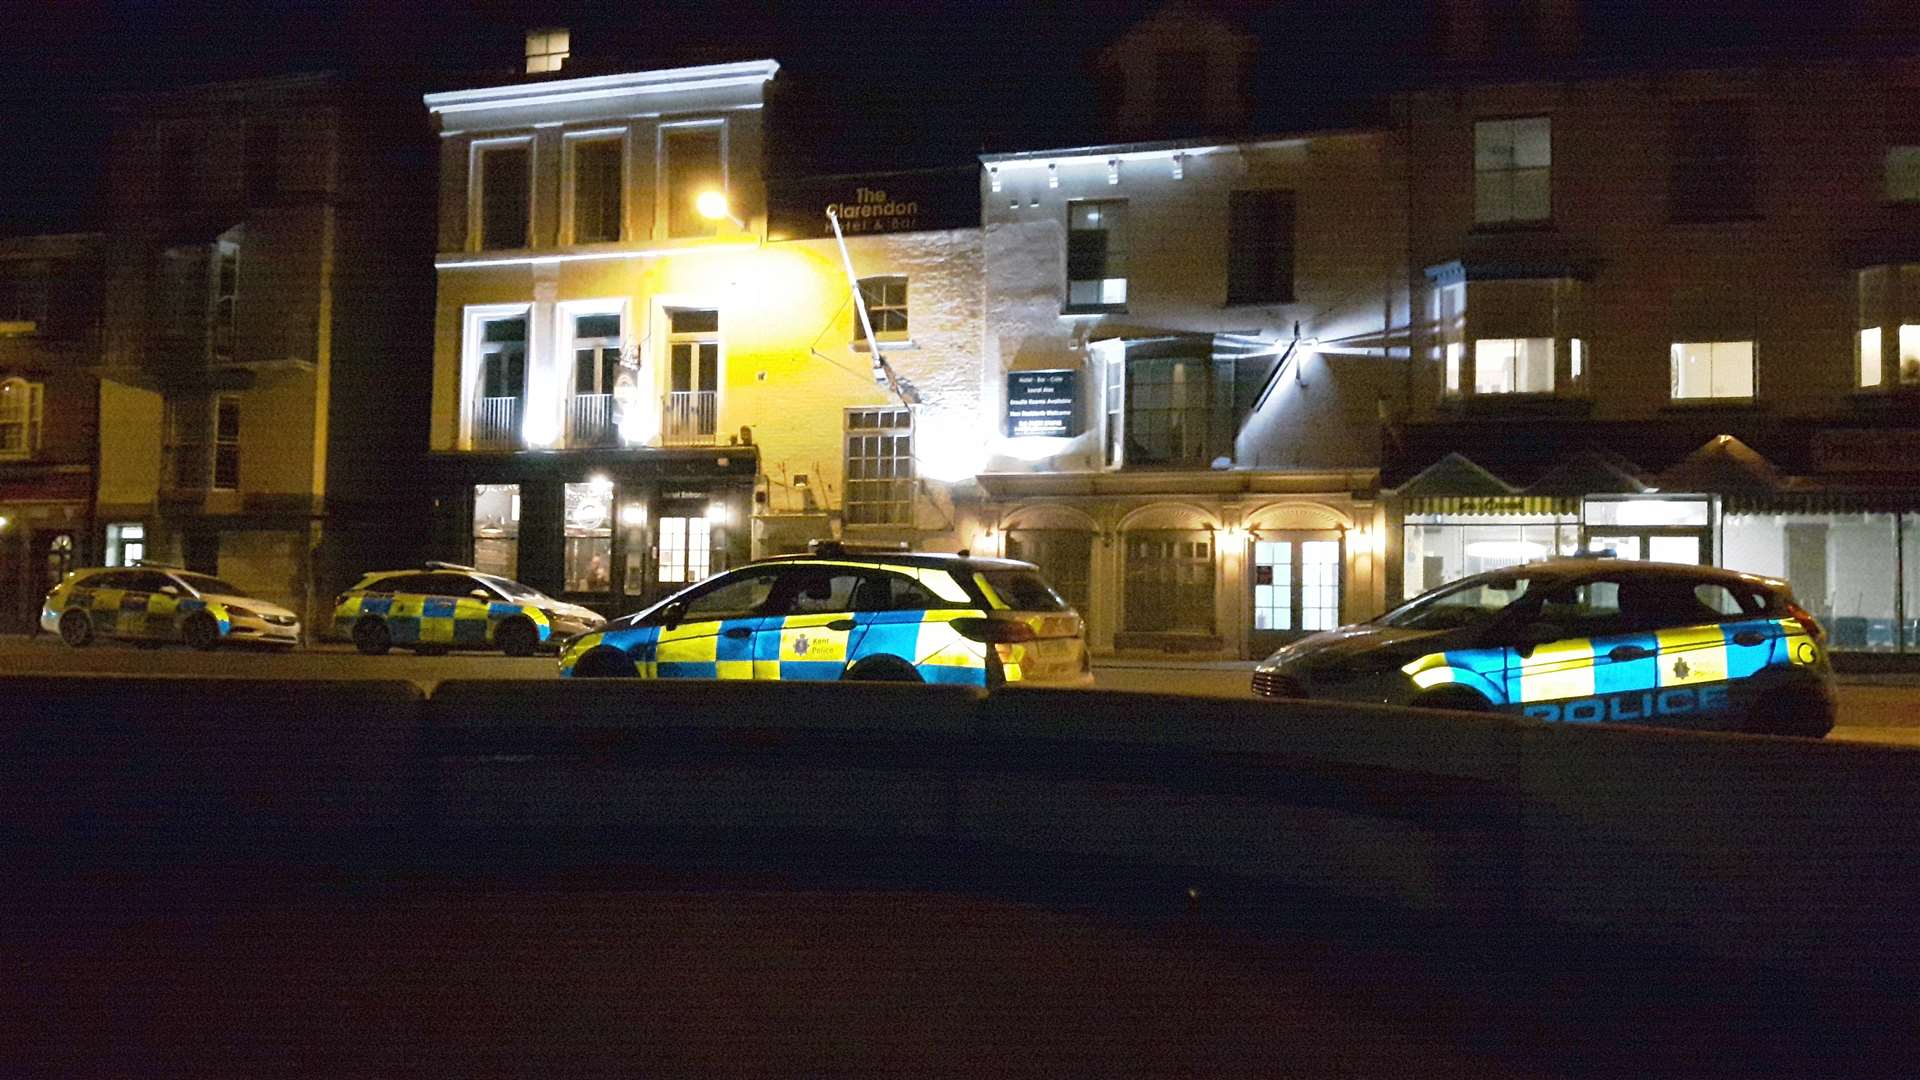 Police in Beach Street, Deal, at the time of the attack